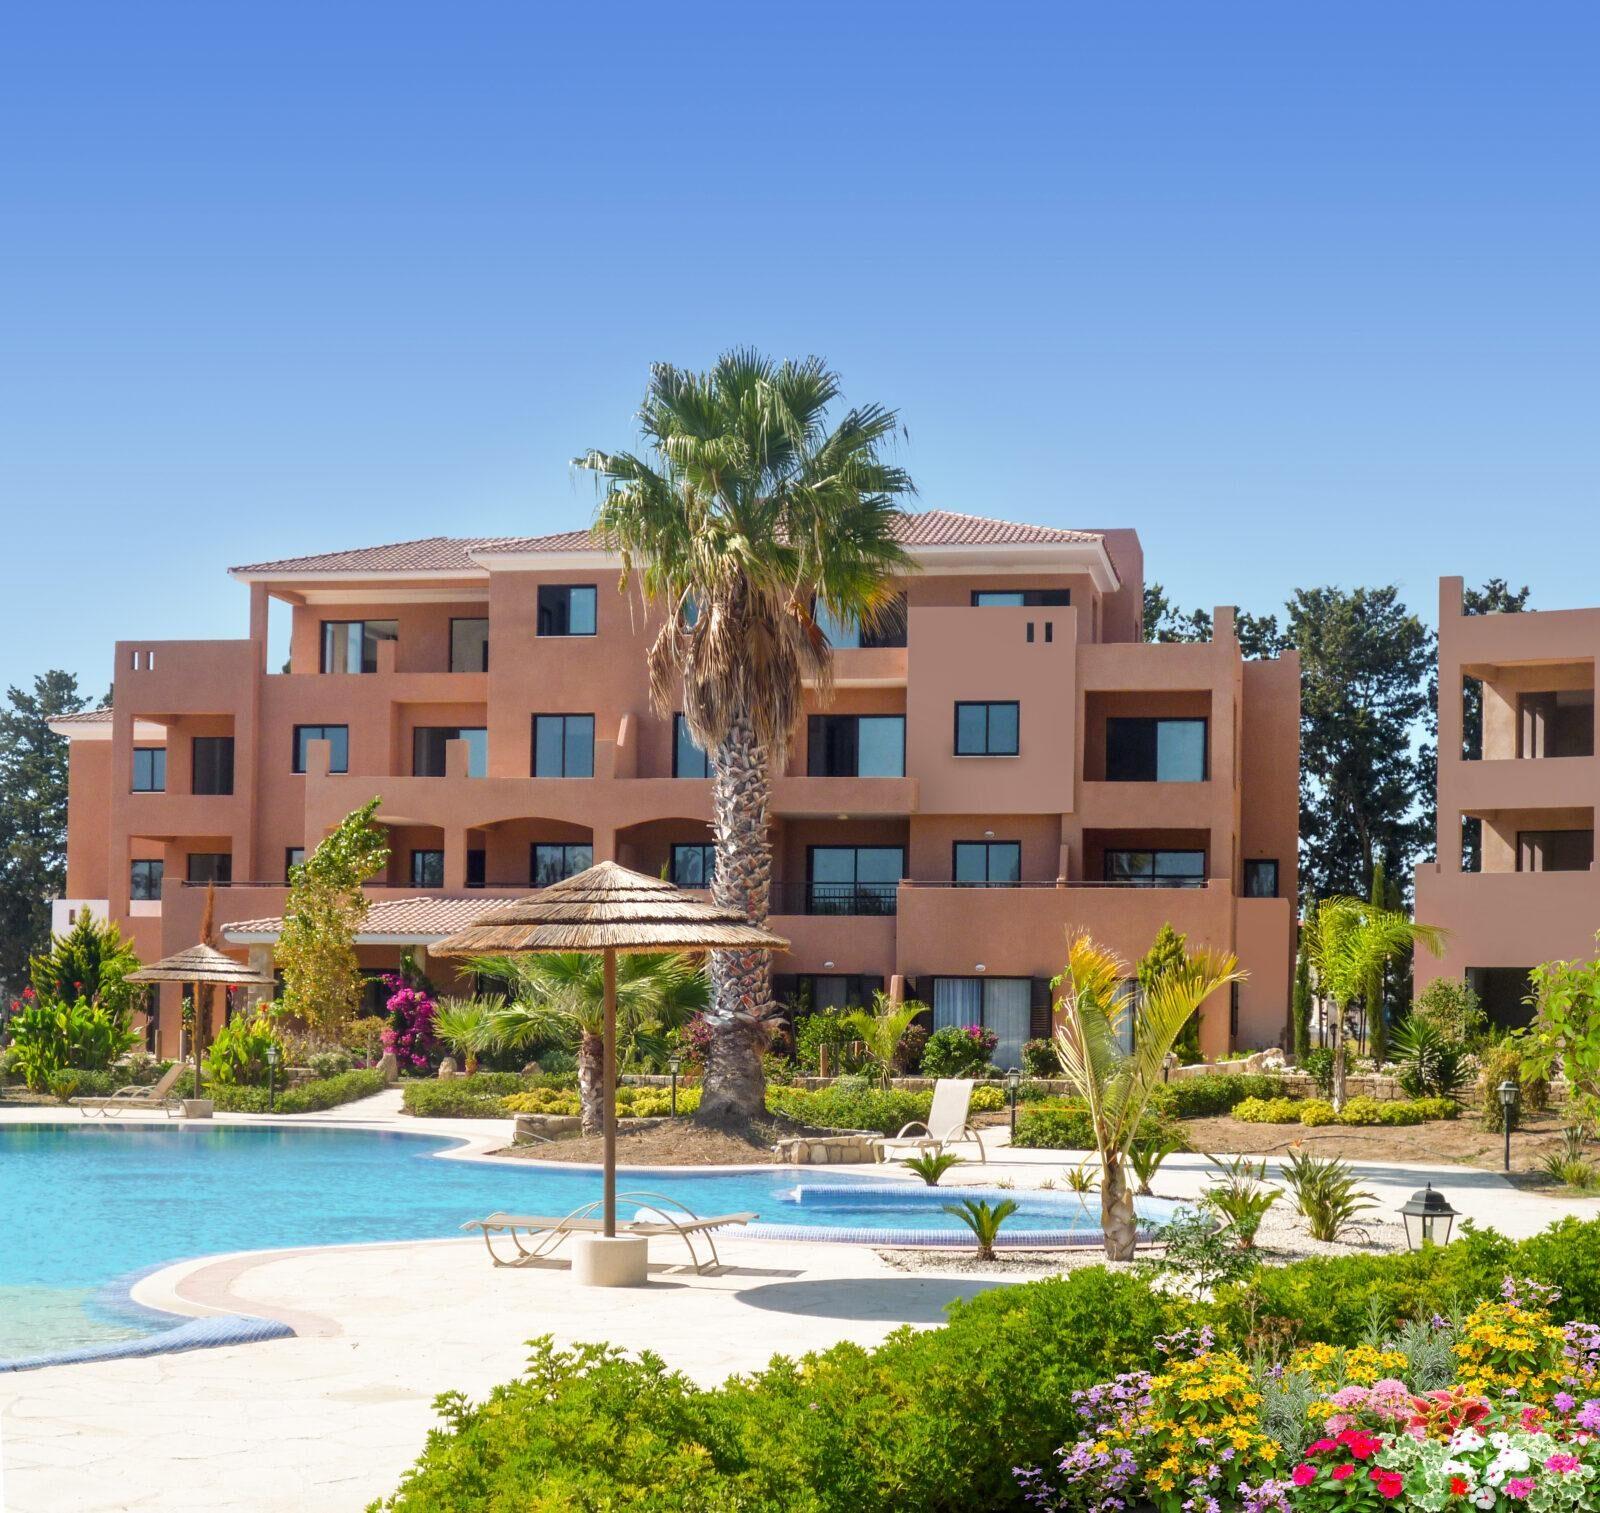 VILLAS AND APARTMENTS FOR SALE IN PAPHOS, CYPRUS